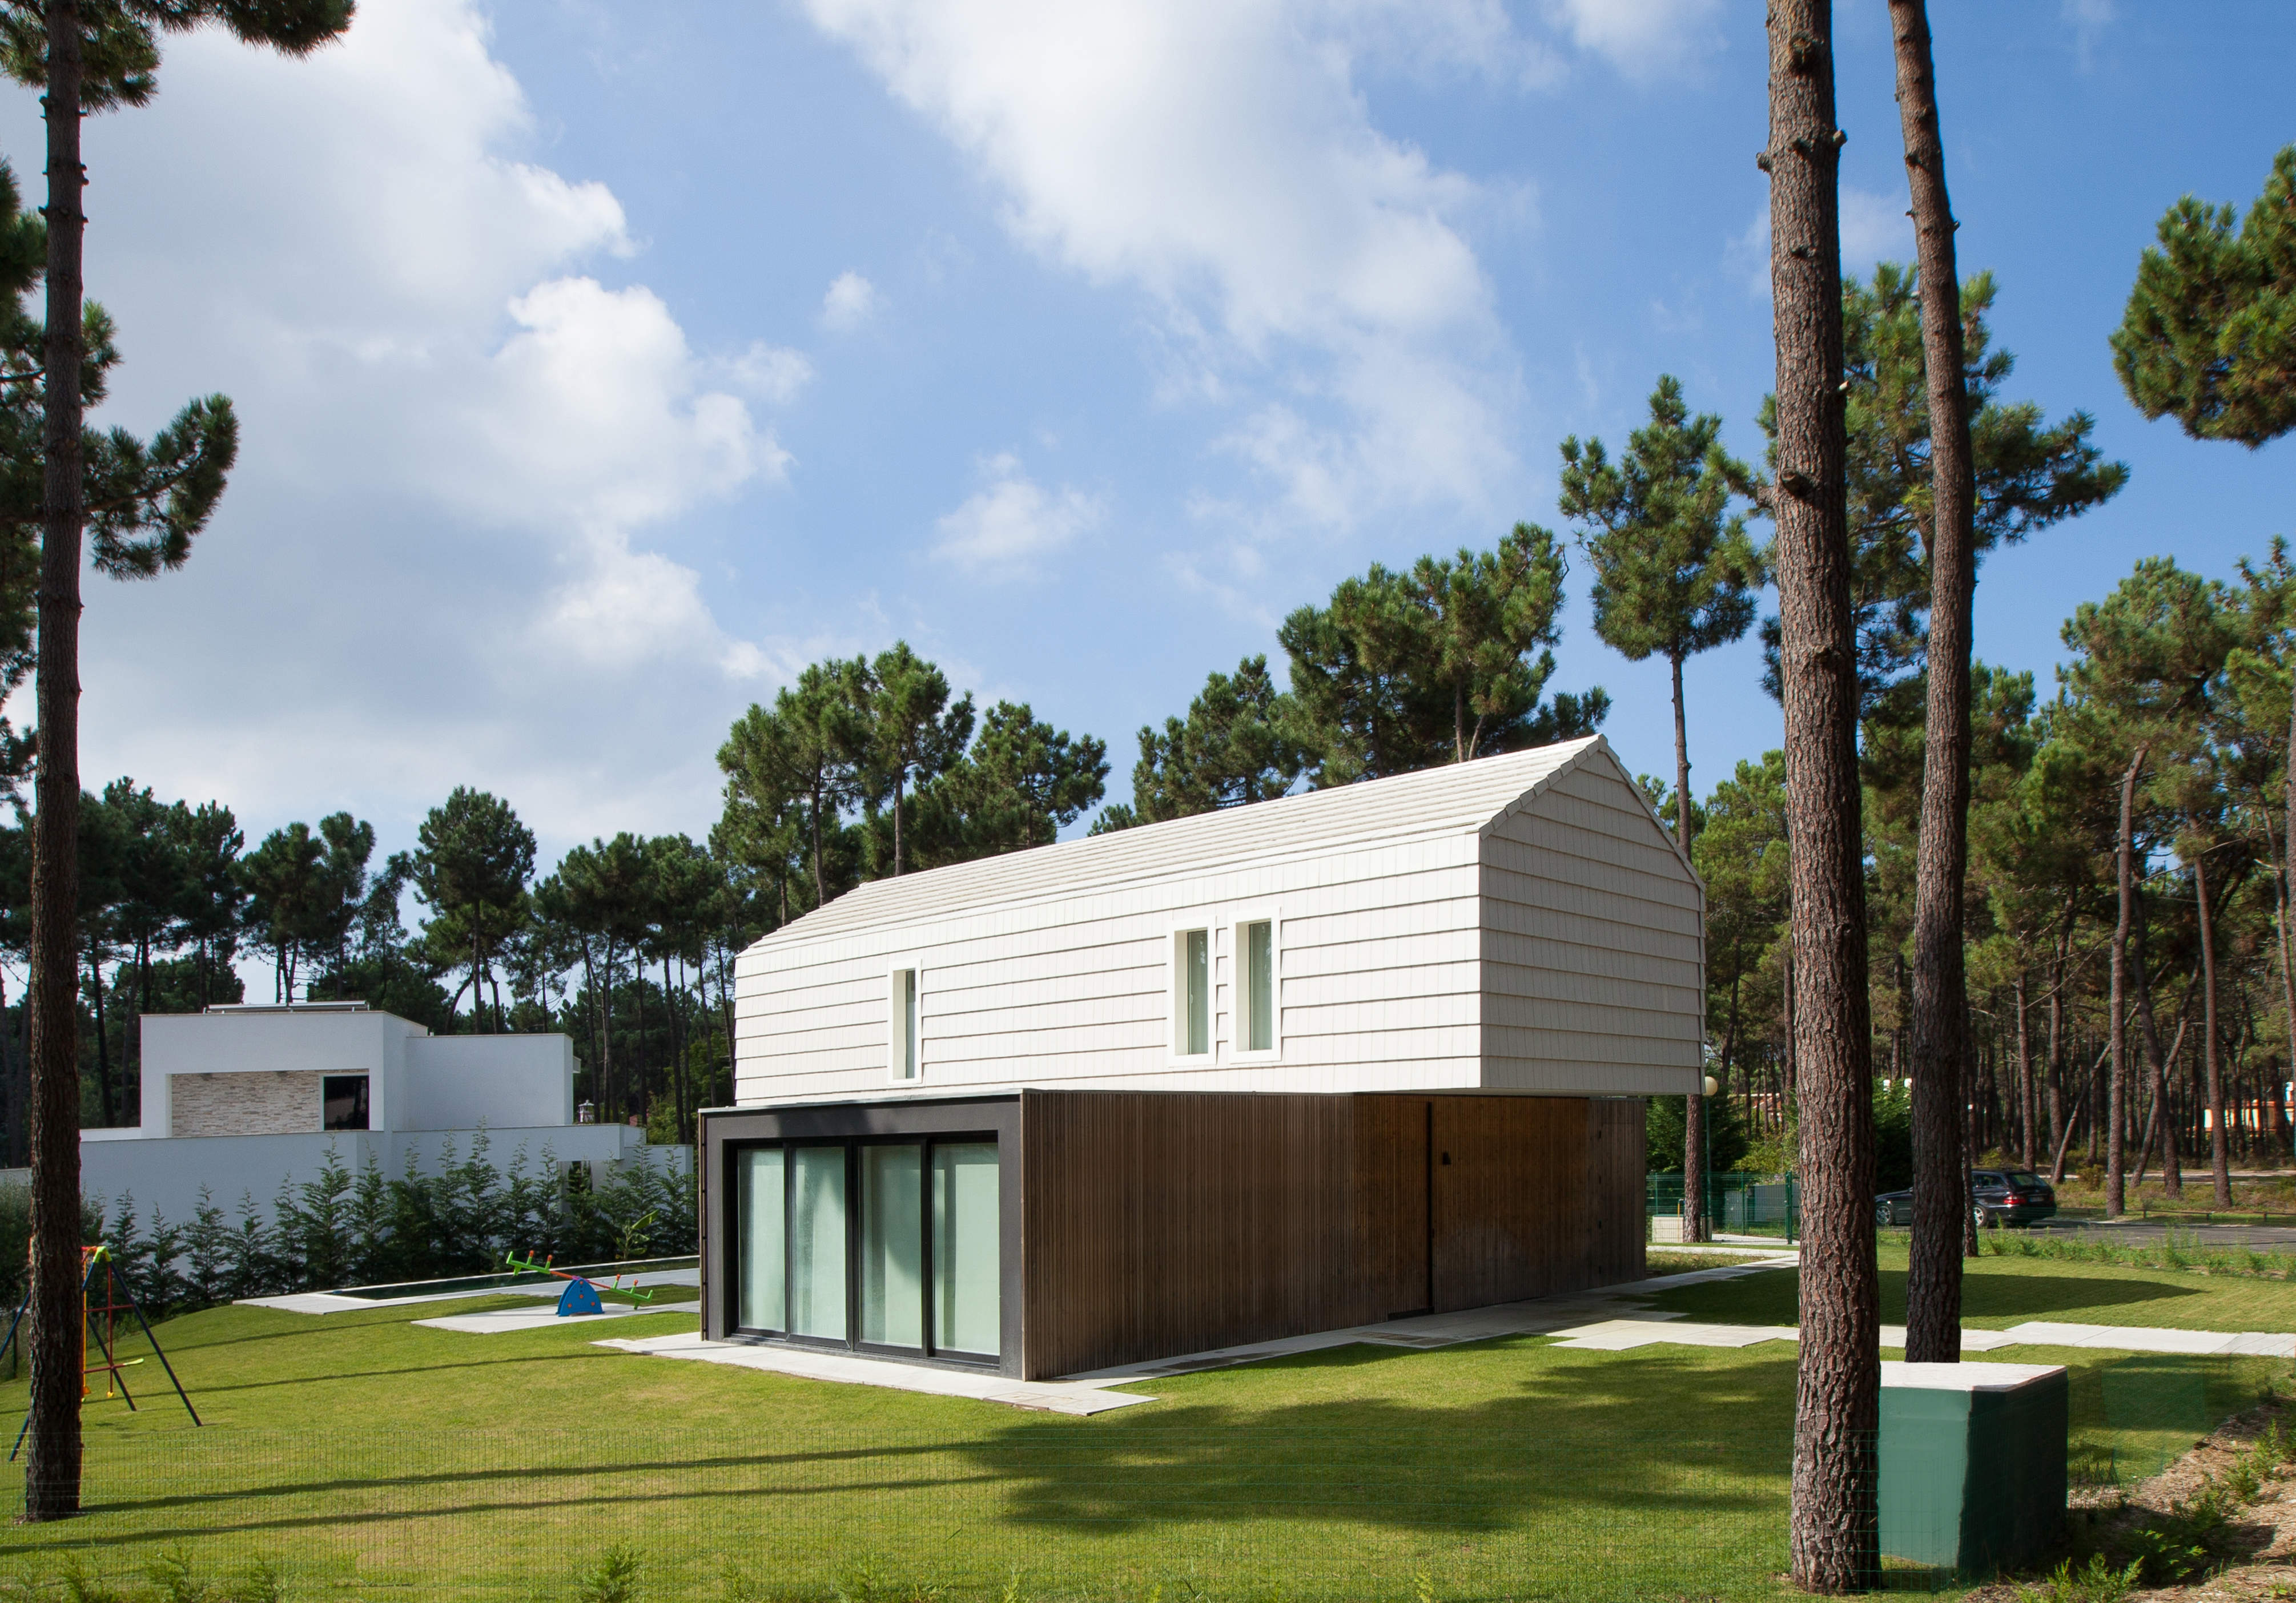 Stunning modular home with CS Plasma white tiled roof and facade cladding envelope